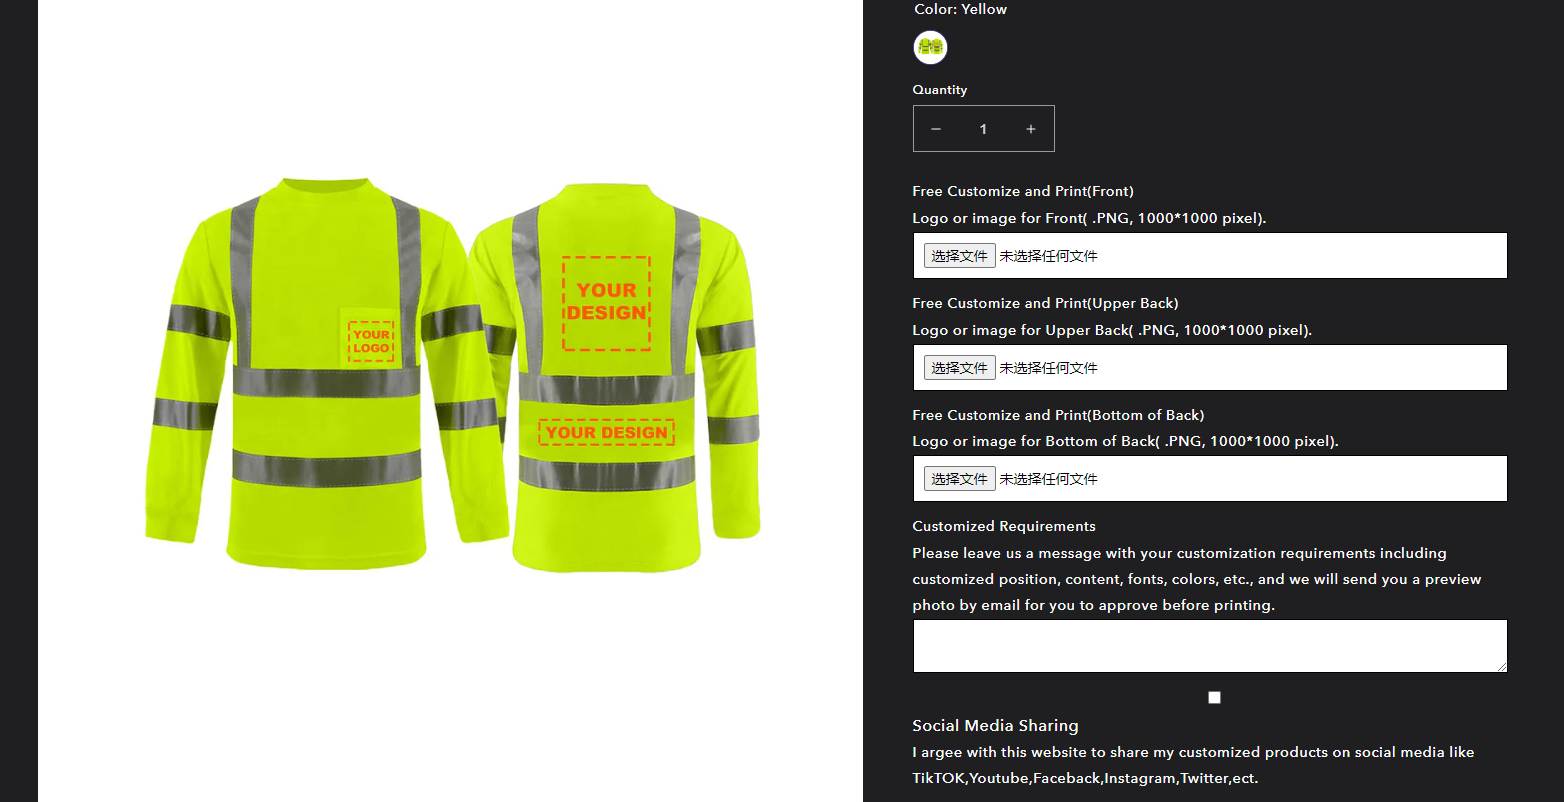 Free custom safety vest hi vis reflective vest mesh with company logo pockets zipper personalized printed Customize cheap construction traffic security work vest class 3 yellow green red pink black blue orange color no minimum S M L XL XXL ANSI/ISEA 107 Class 2